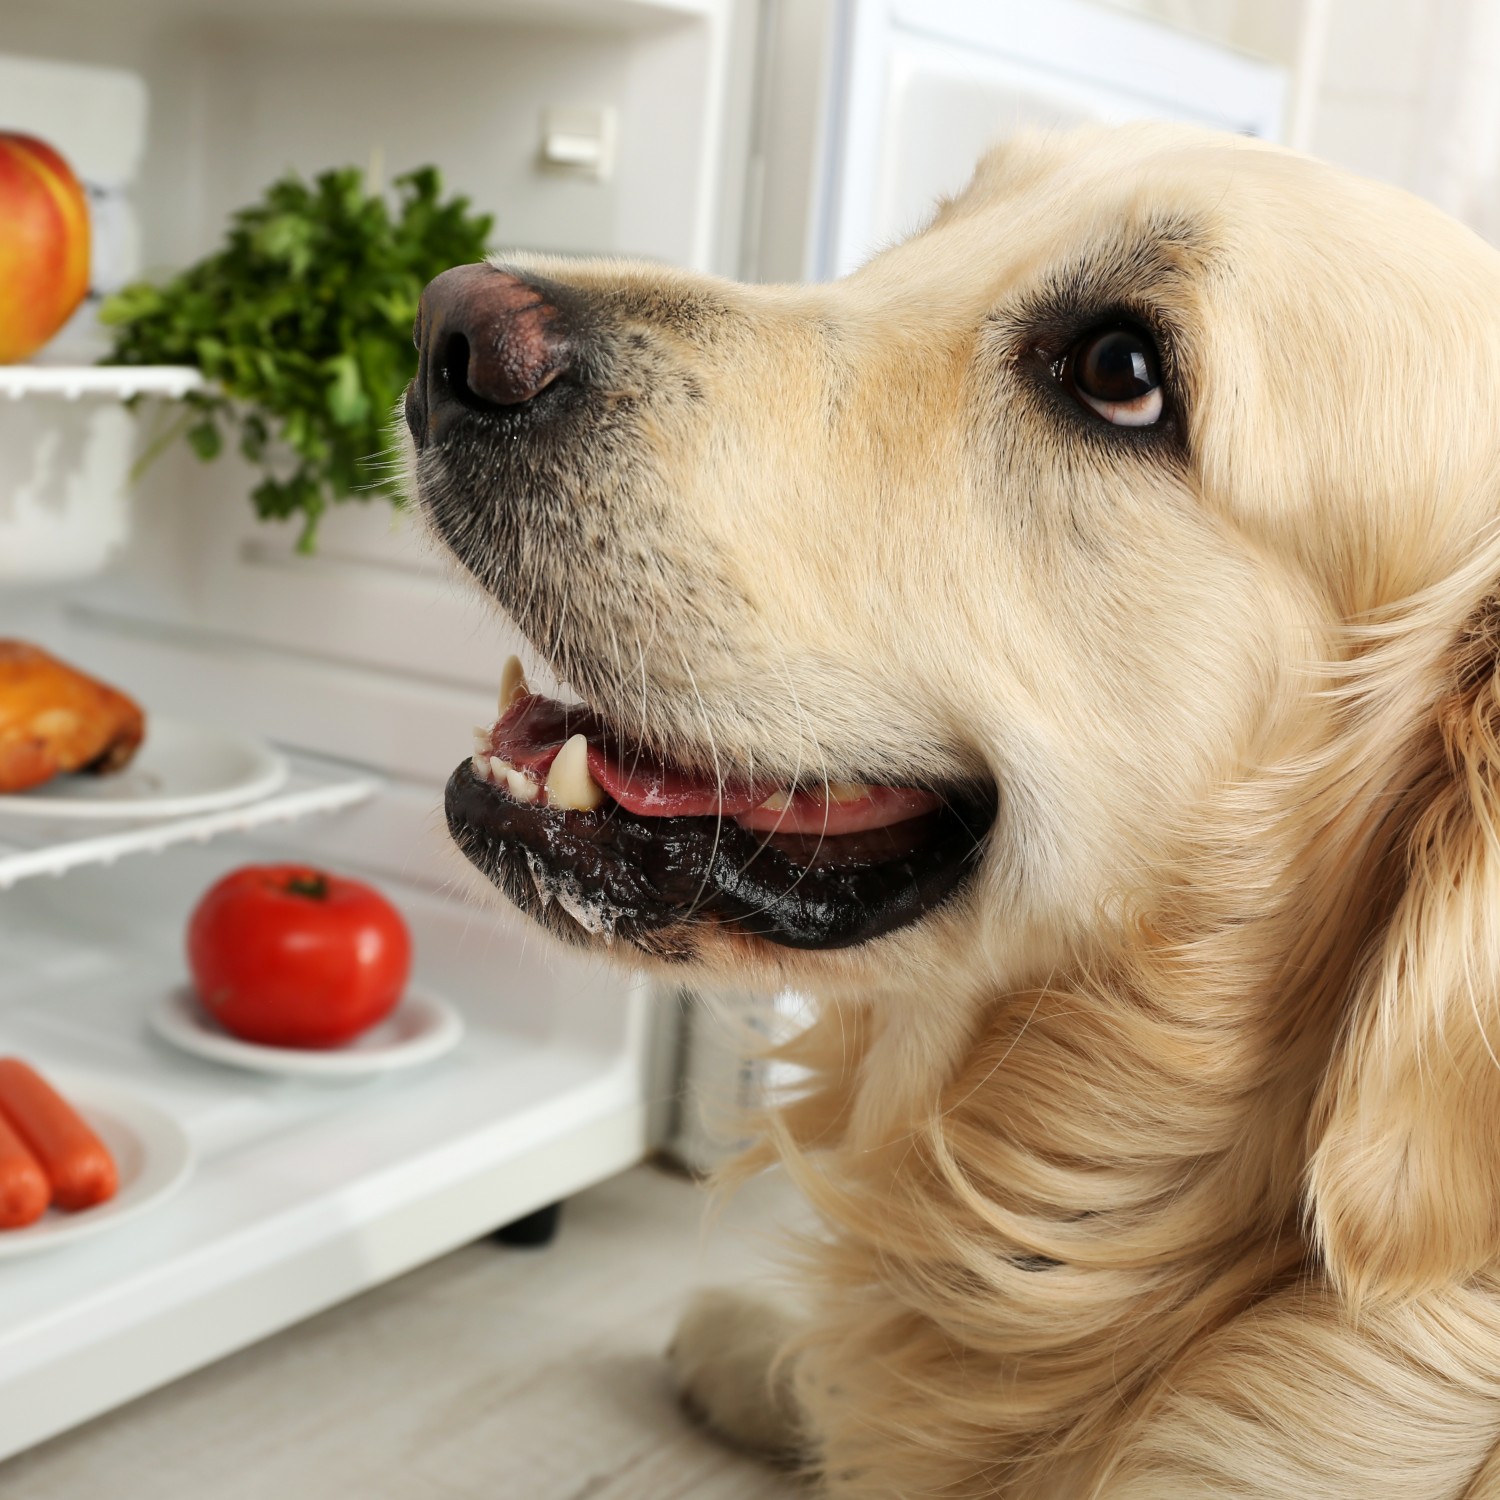 Dog Standing Next to Refrigerator With Food